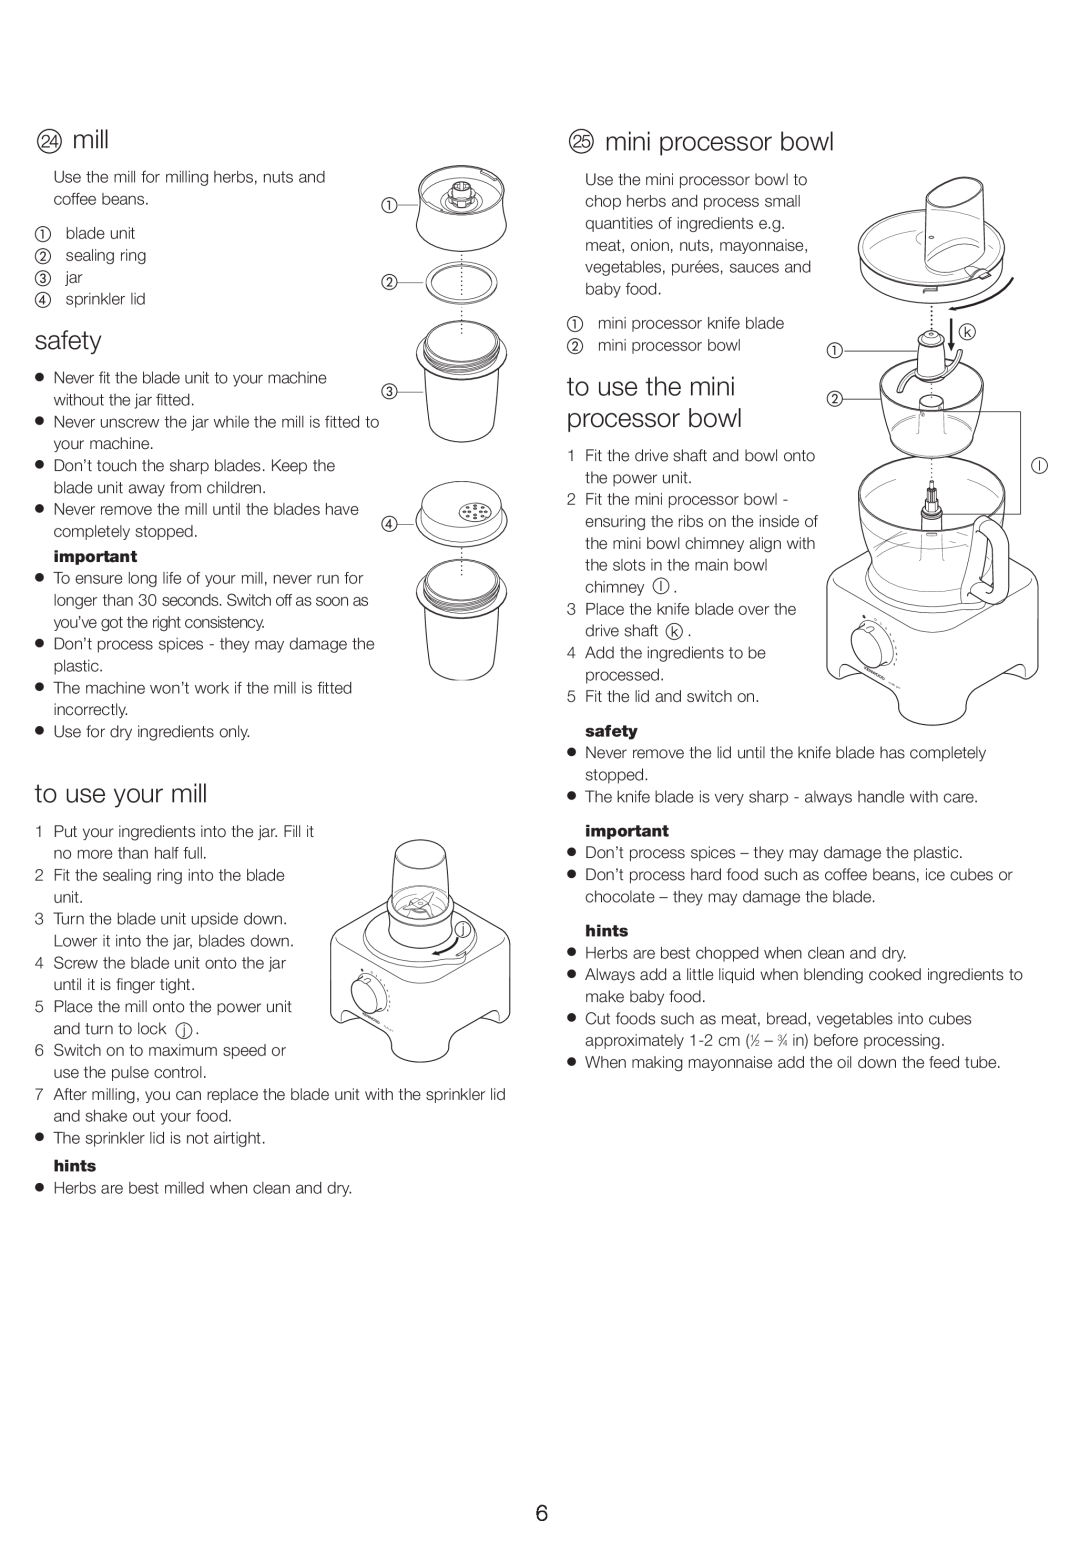 Kenwood FP730 series manual to use your mill, to use the mini processor bowl, safety, hints 